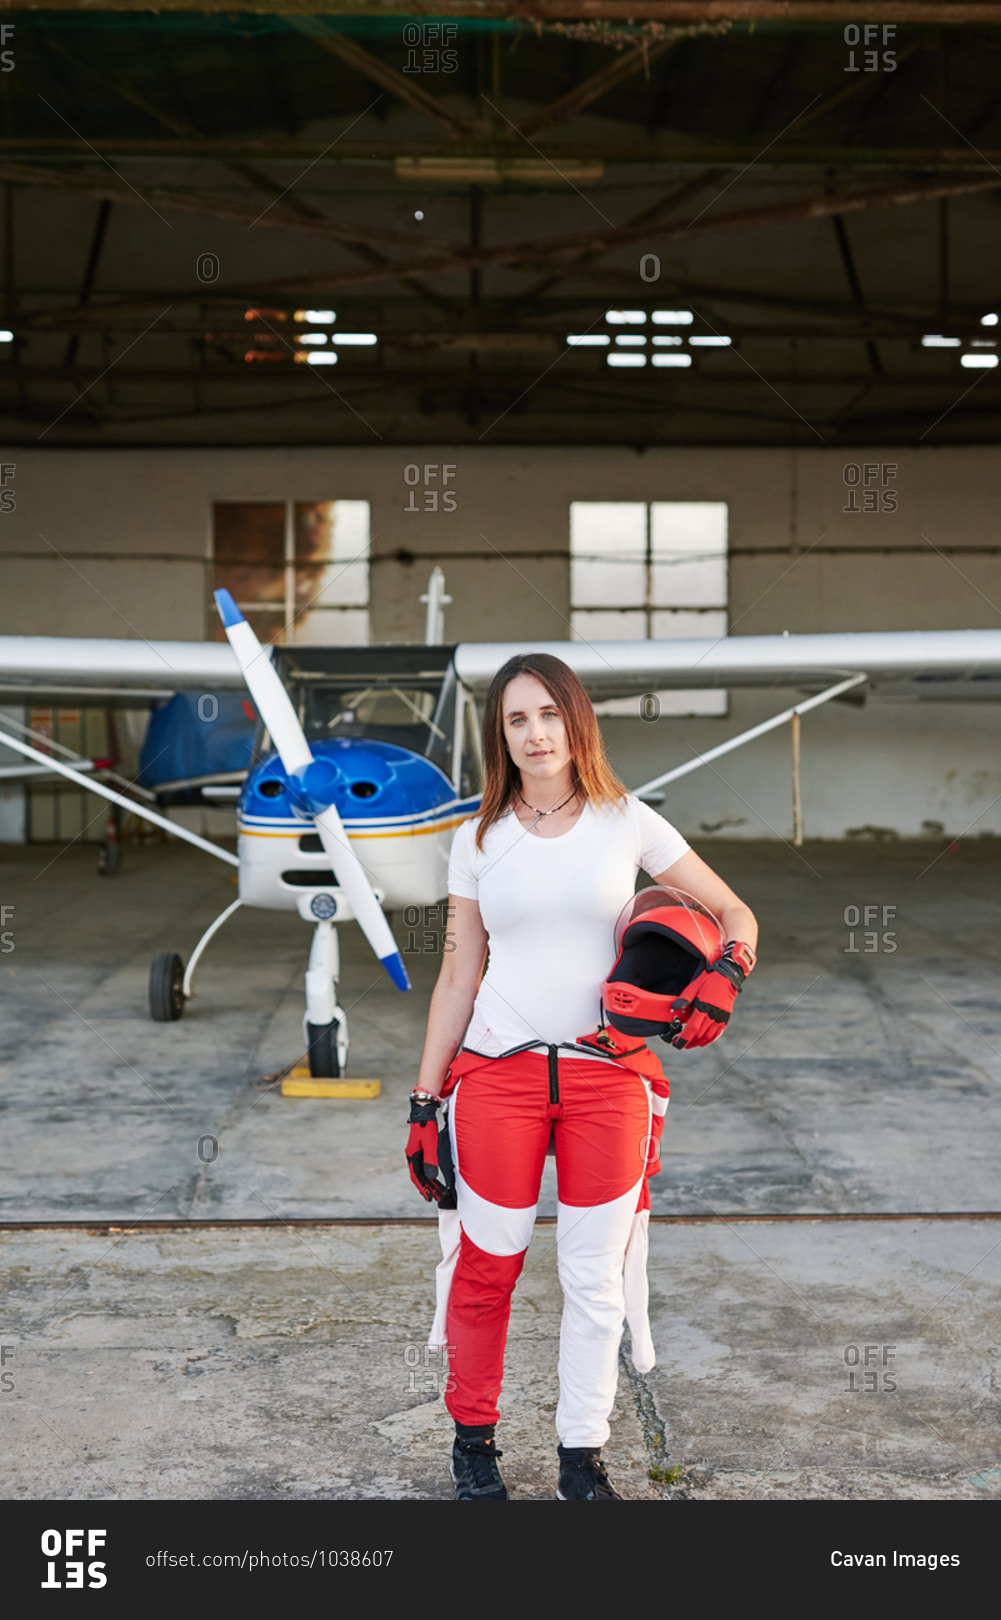 Young female skydiver in a plane hangar with a plane behind her